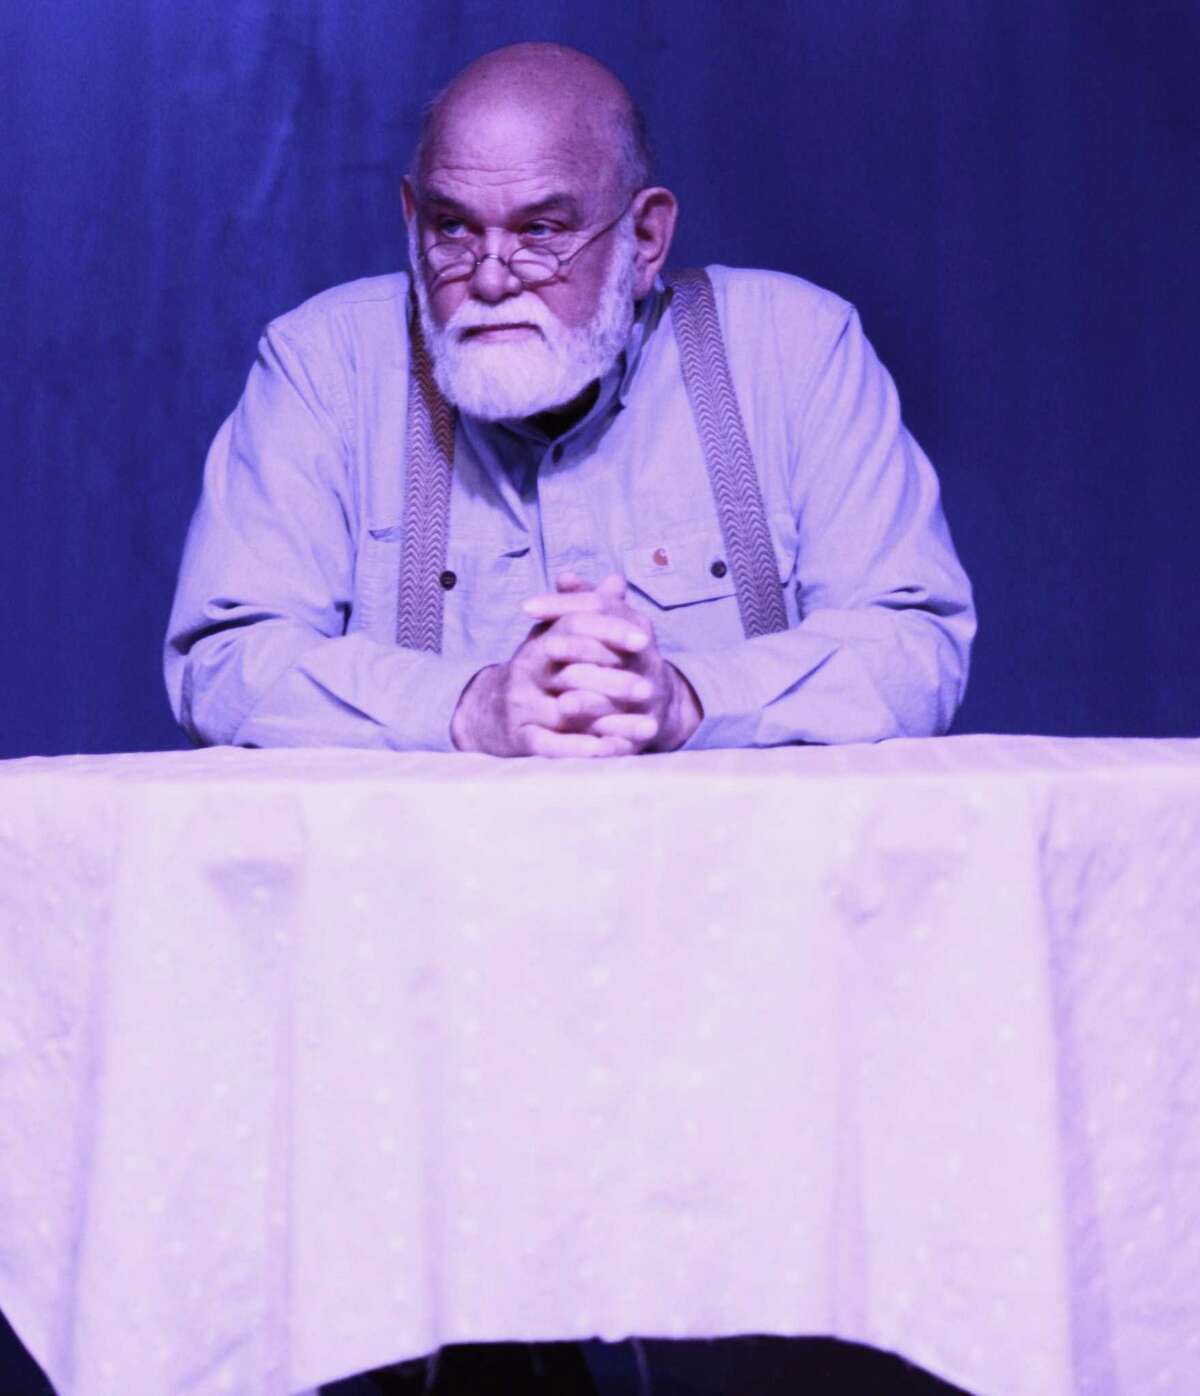 The Players Theatre Company opens "The Rainmaker" at the Owen Theatre Jan. 21. The show continues weekends through Feb. 5. Pictured is John Thompson as H.C. Curry.